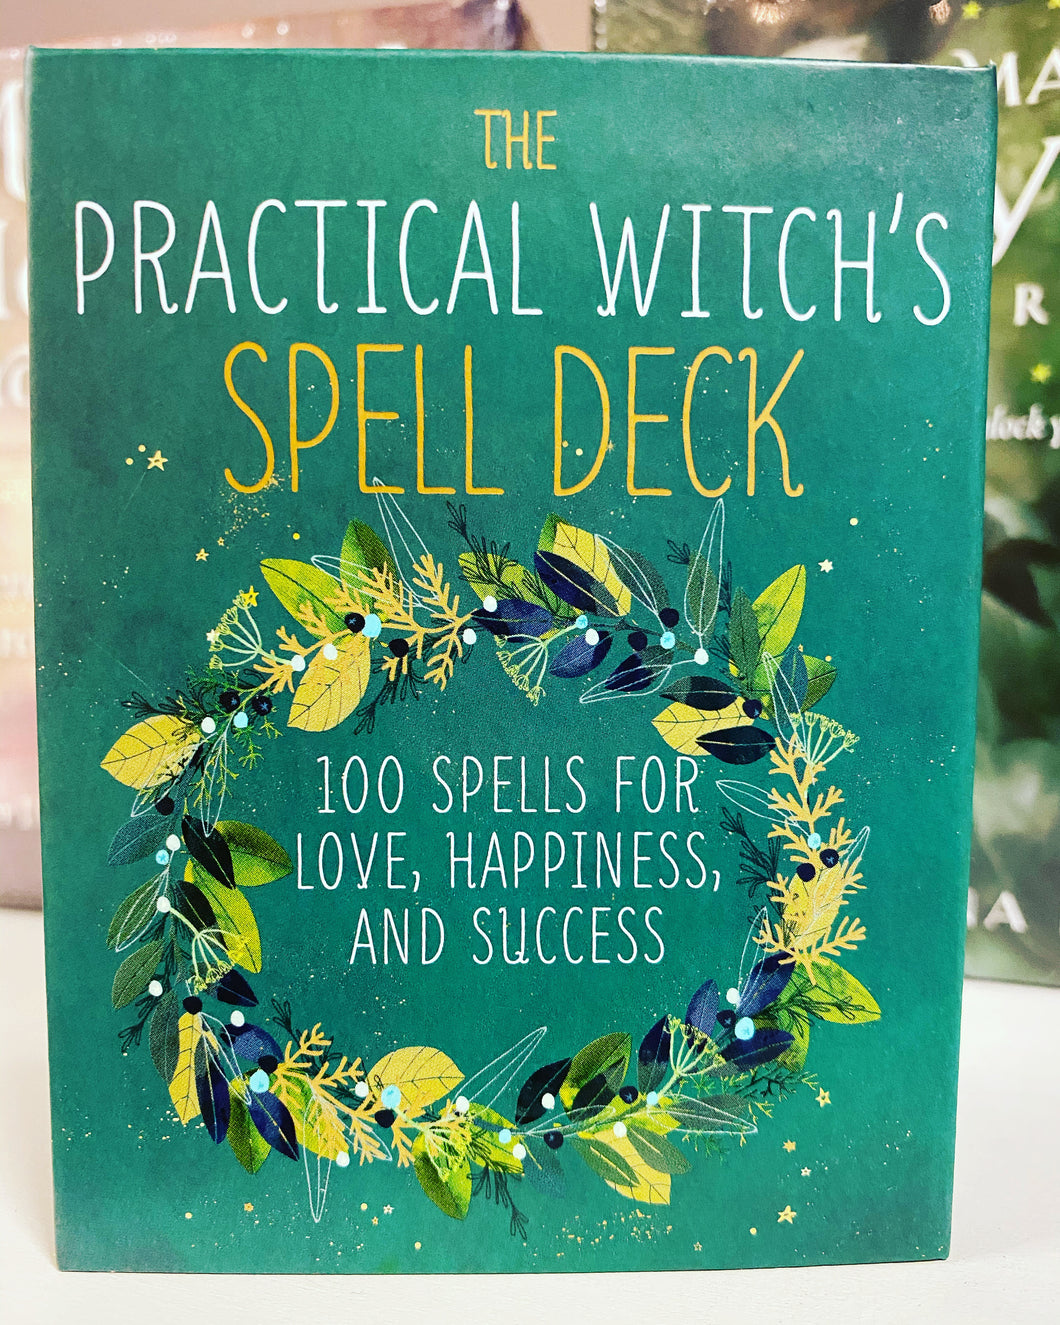 Practical Witches Spell Deck